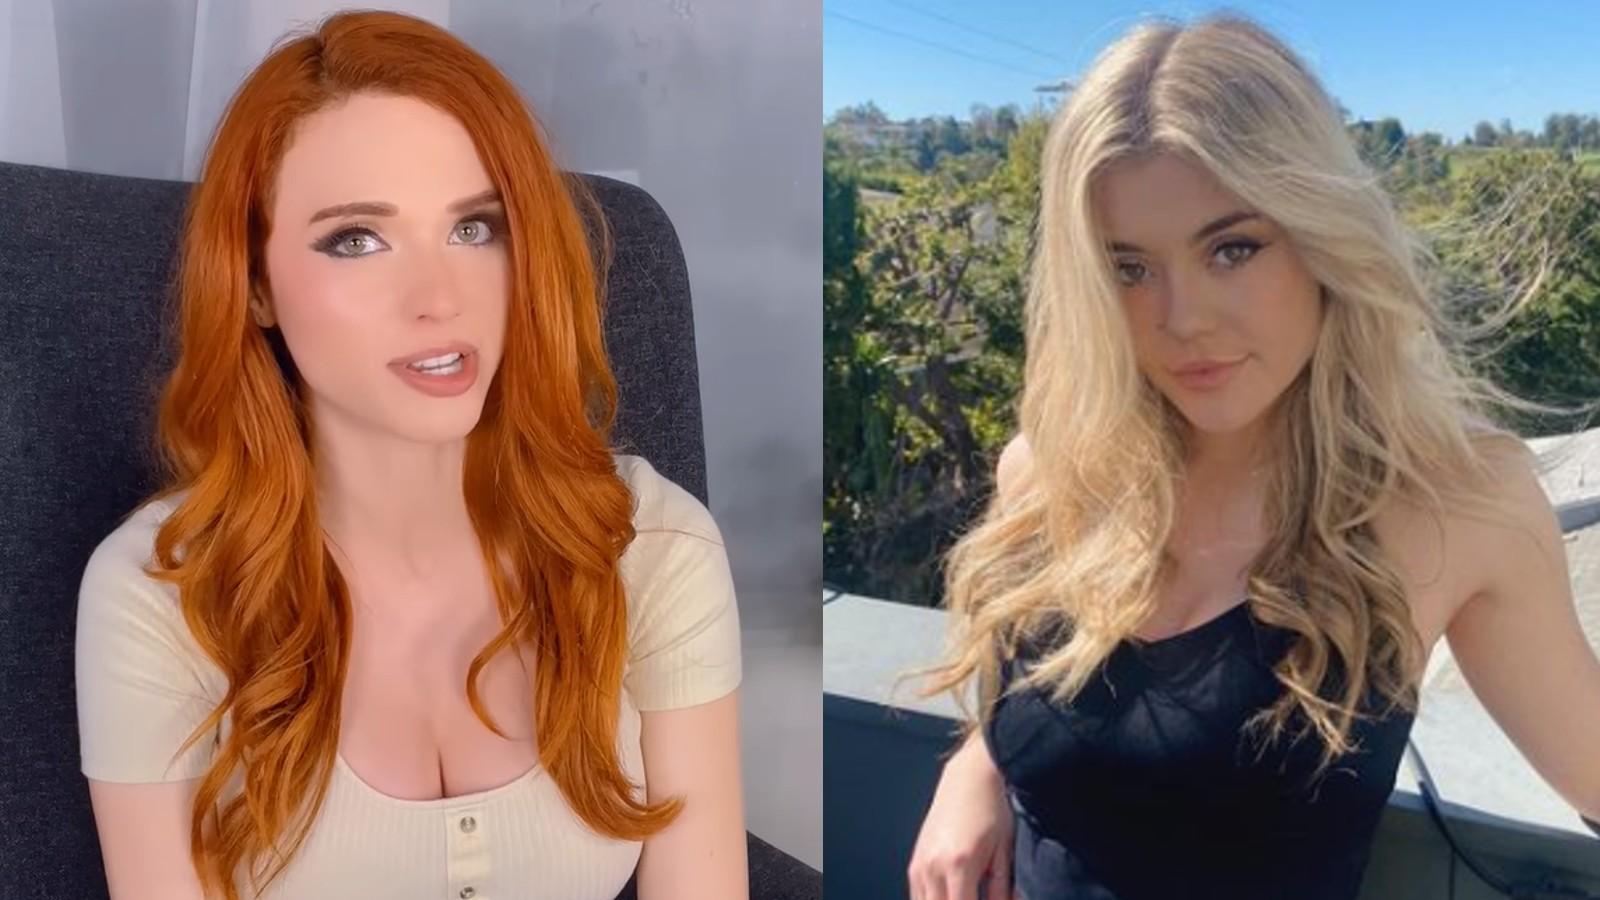 Twitch streamers Amouranth talking on YouTube and Brooke Bond posing in Instagram picture